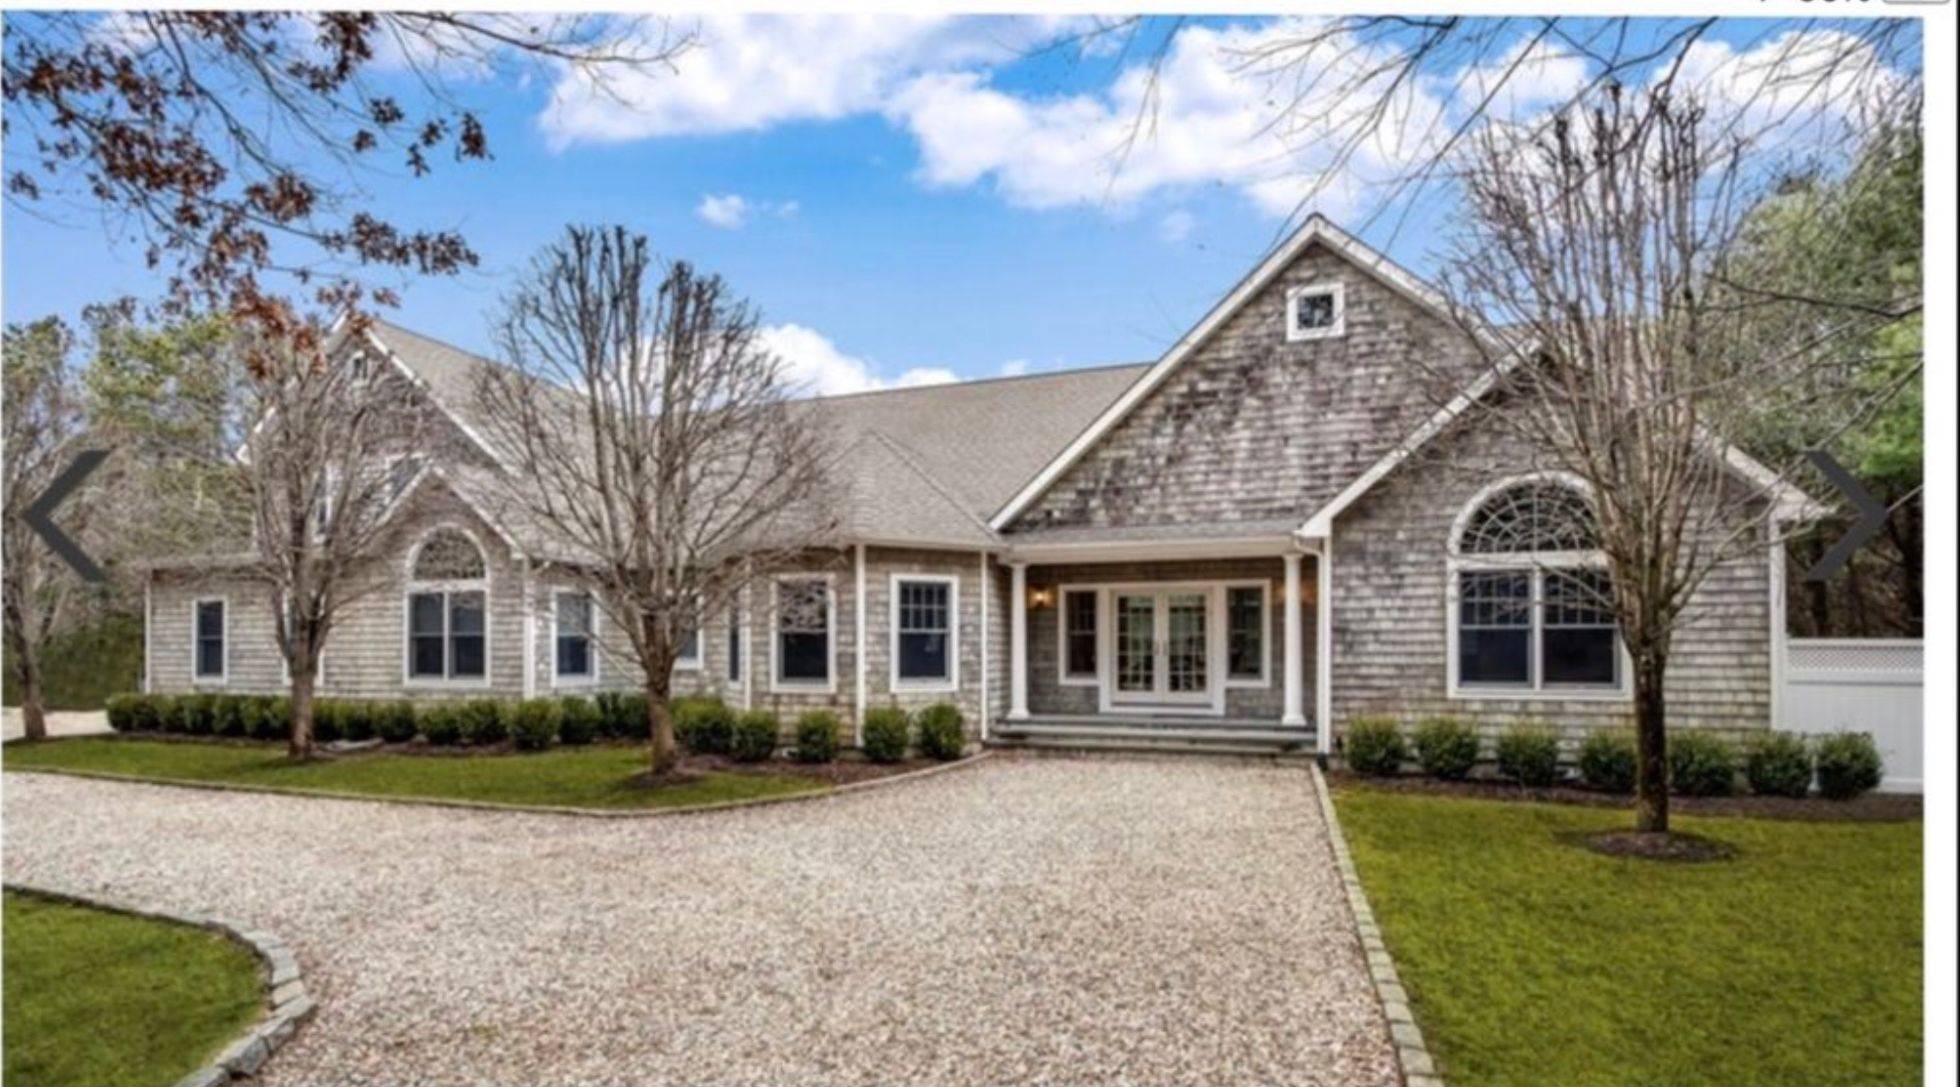 Stunning 4 Bedroom Home in Sag Harbor with Tennis!